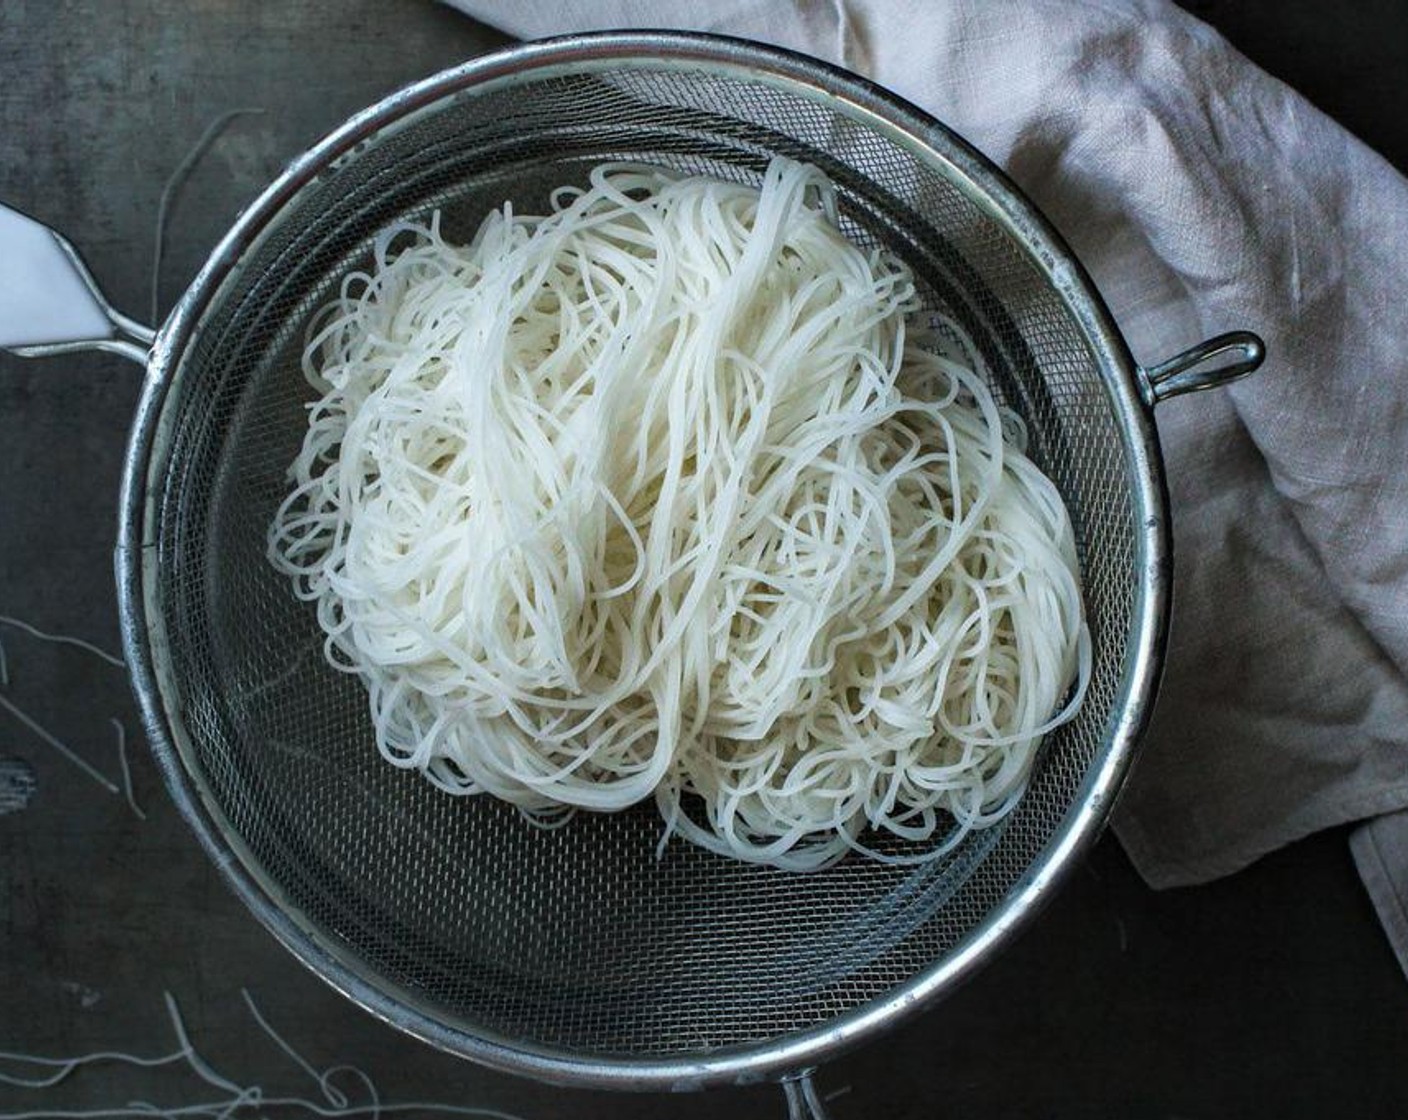 step 2 Strain the noodles through a strainer or sieve after they are pliable and feel soft, then put them back in the bowl and quickly cover with a towel to steam them for another 3 minutes.